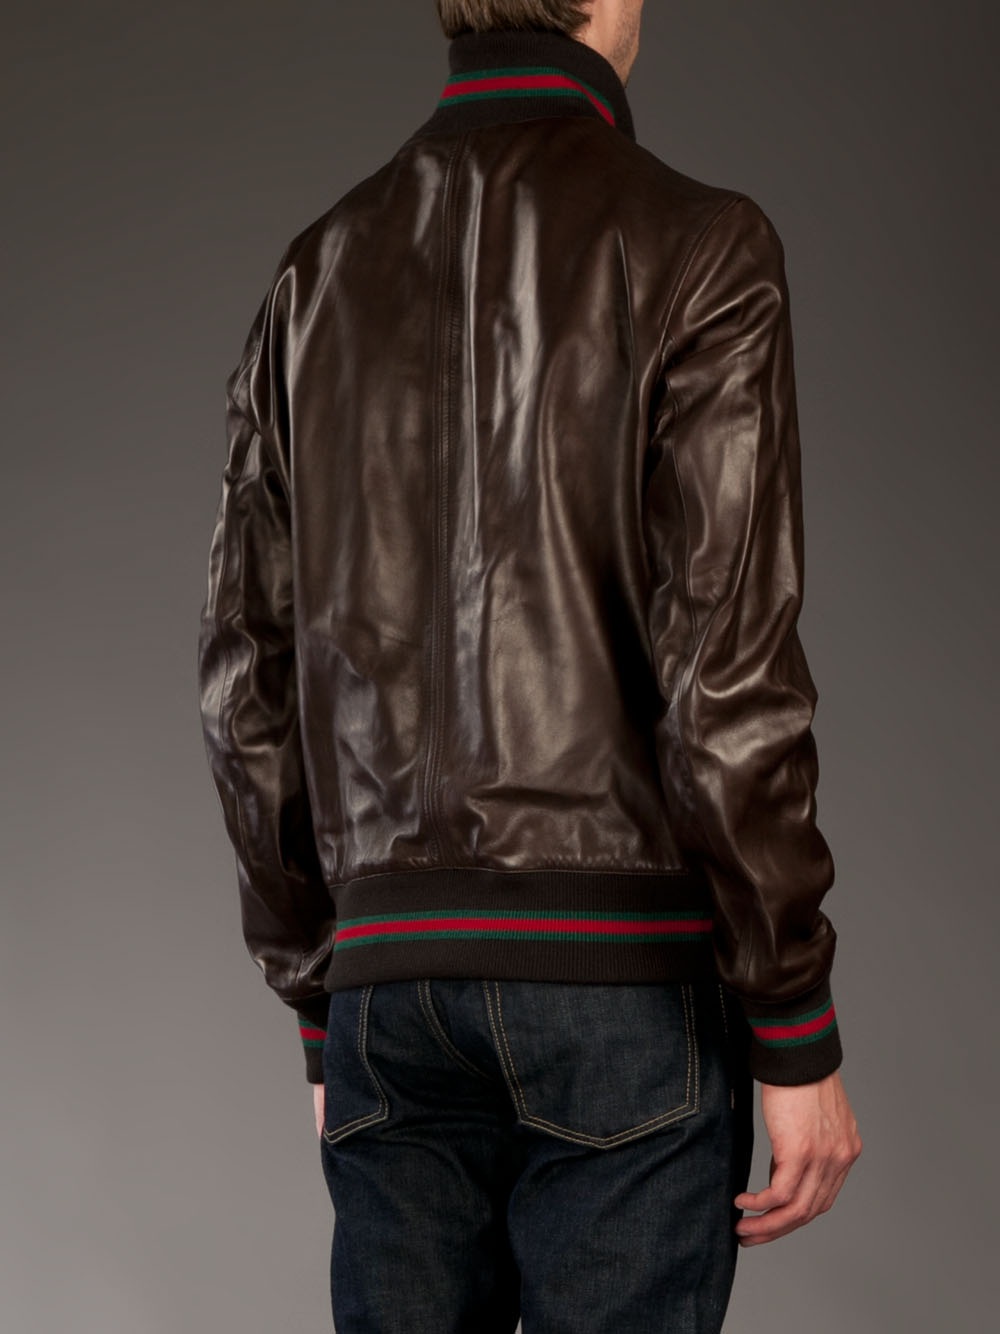 Gucci Leather Jacket in Brown for Men - Lyst